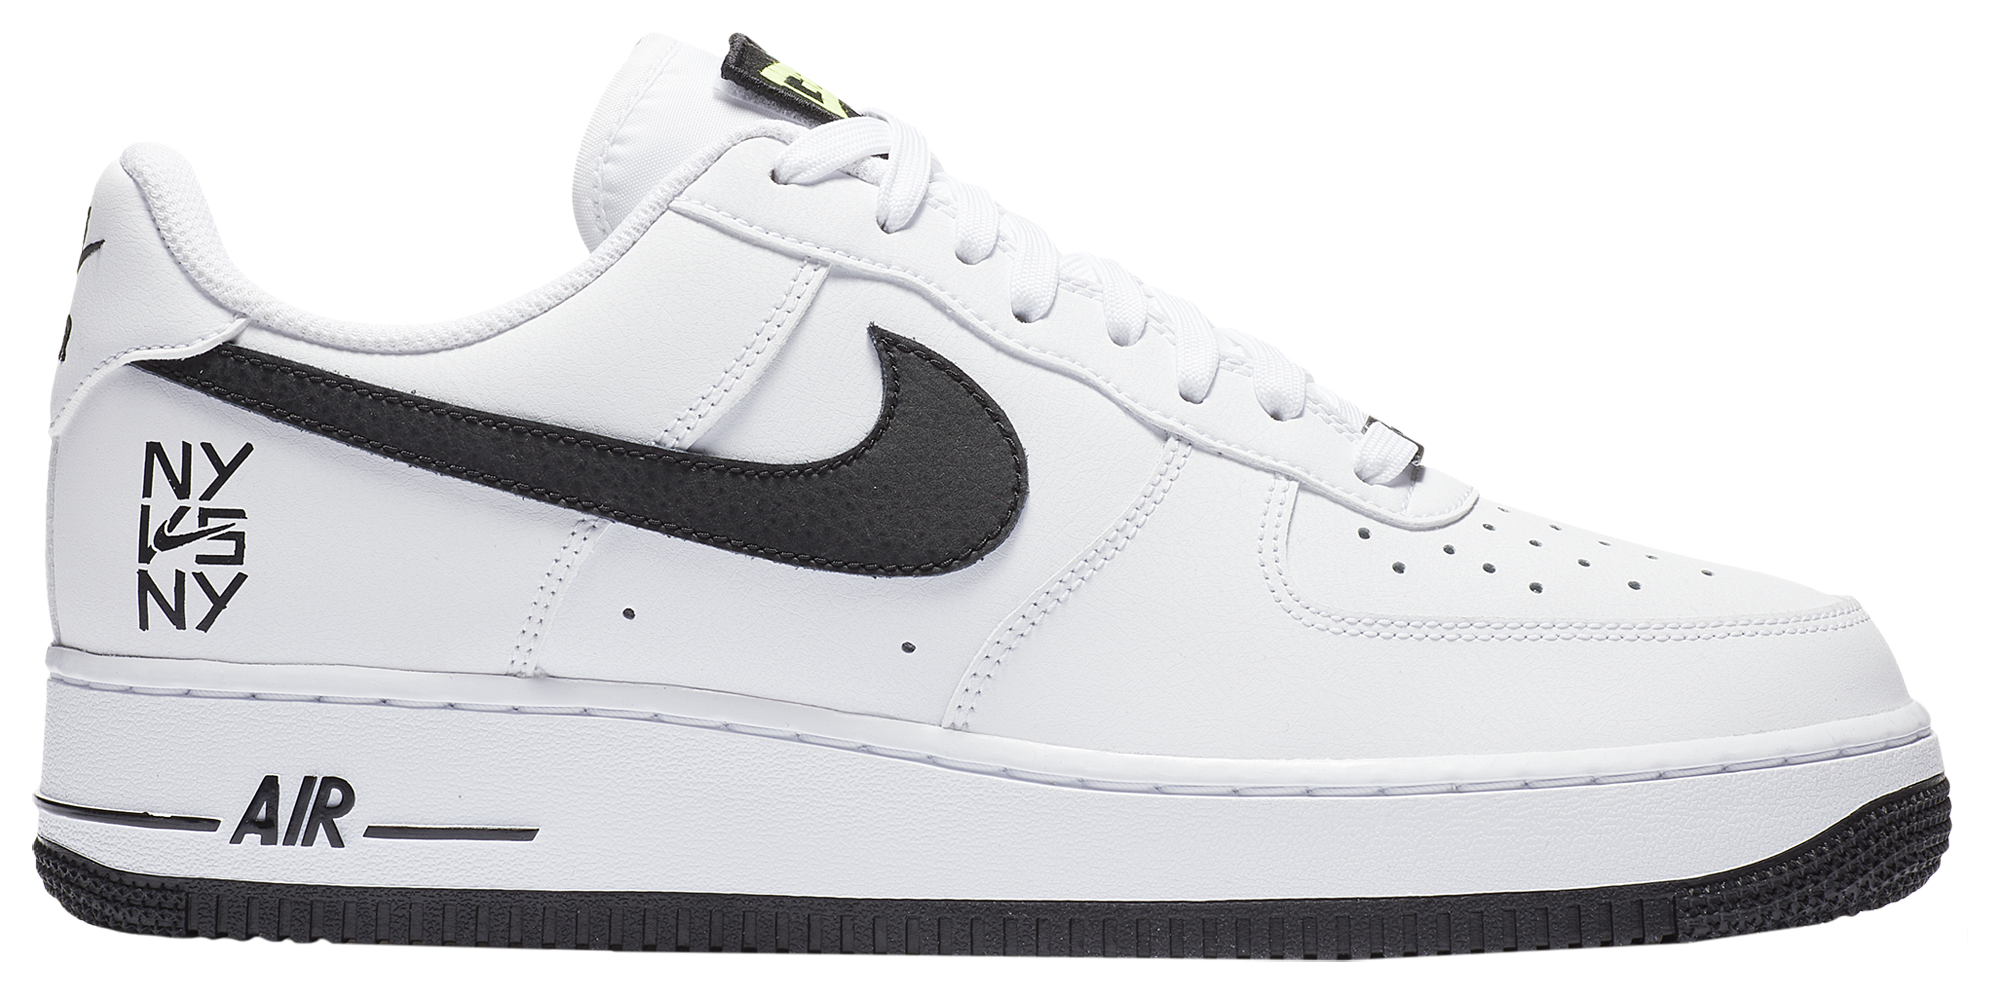 white with black check air force 1